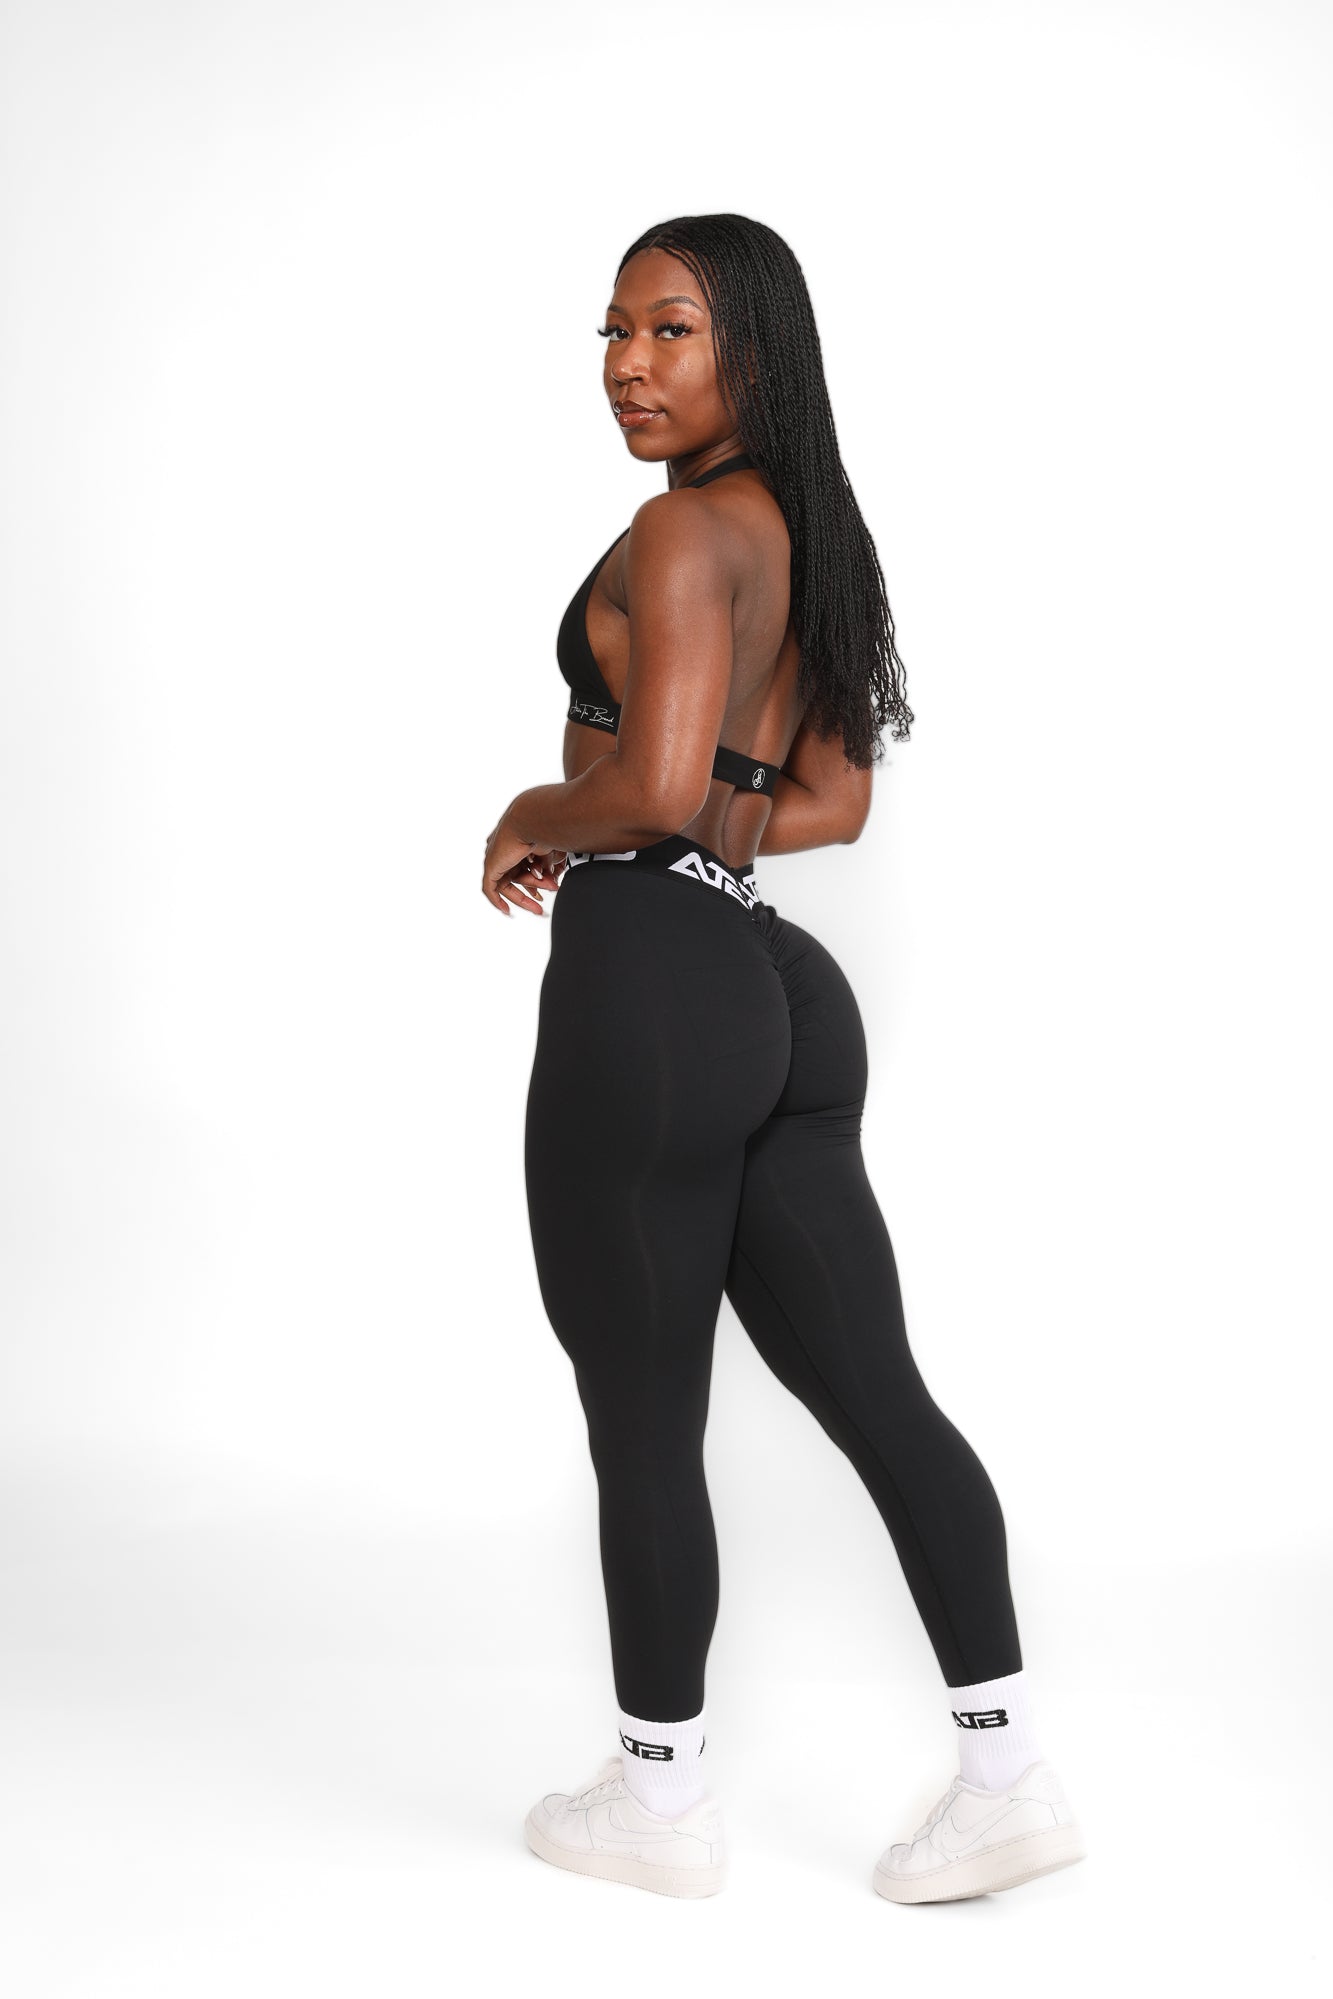 Tikiboo - The gorgeous Allure Leggings are new in! Also available